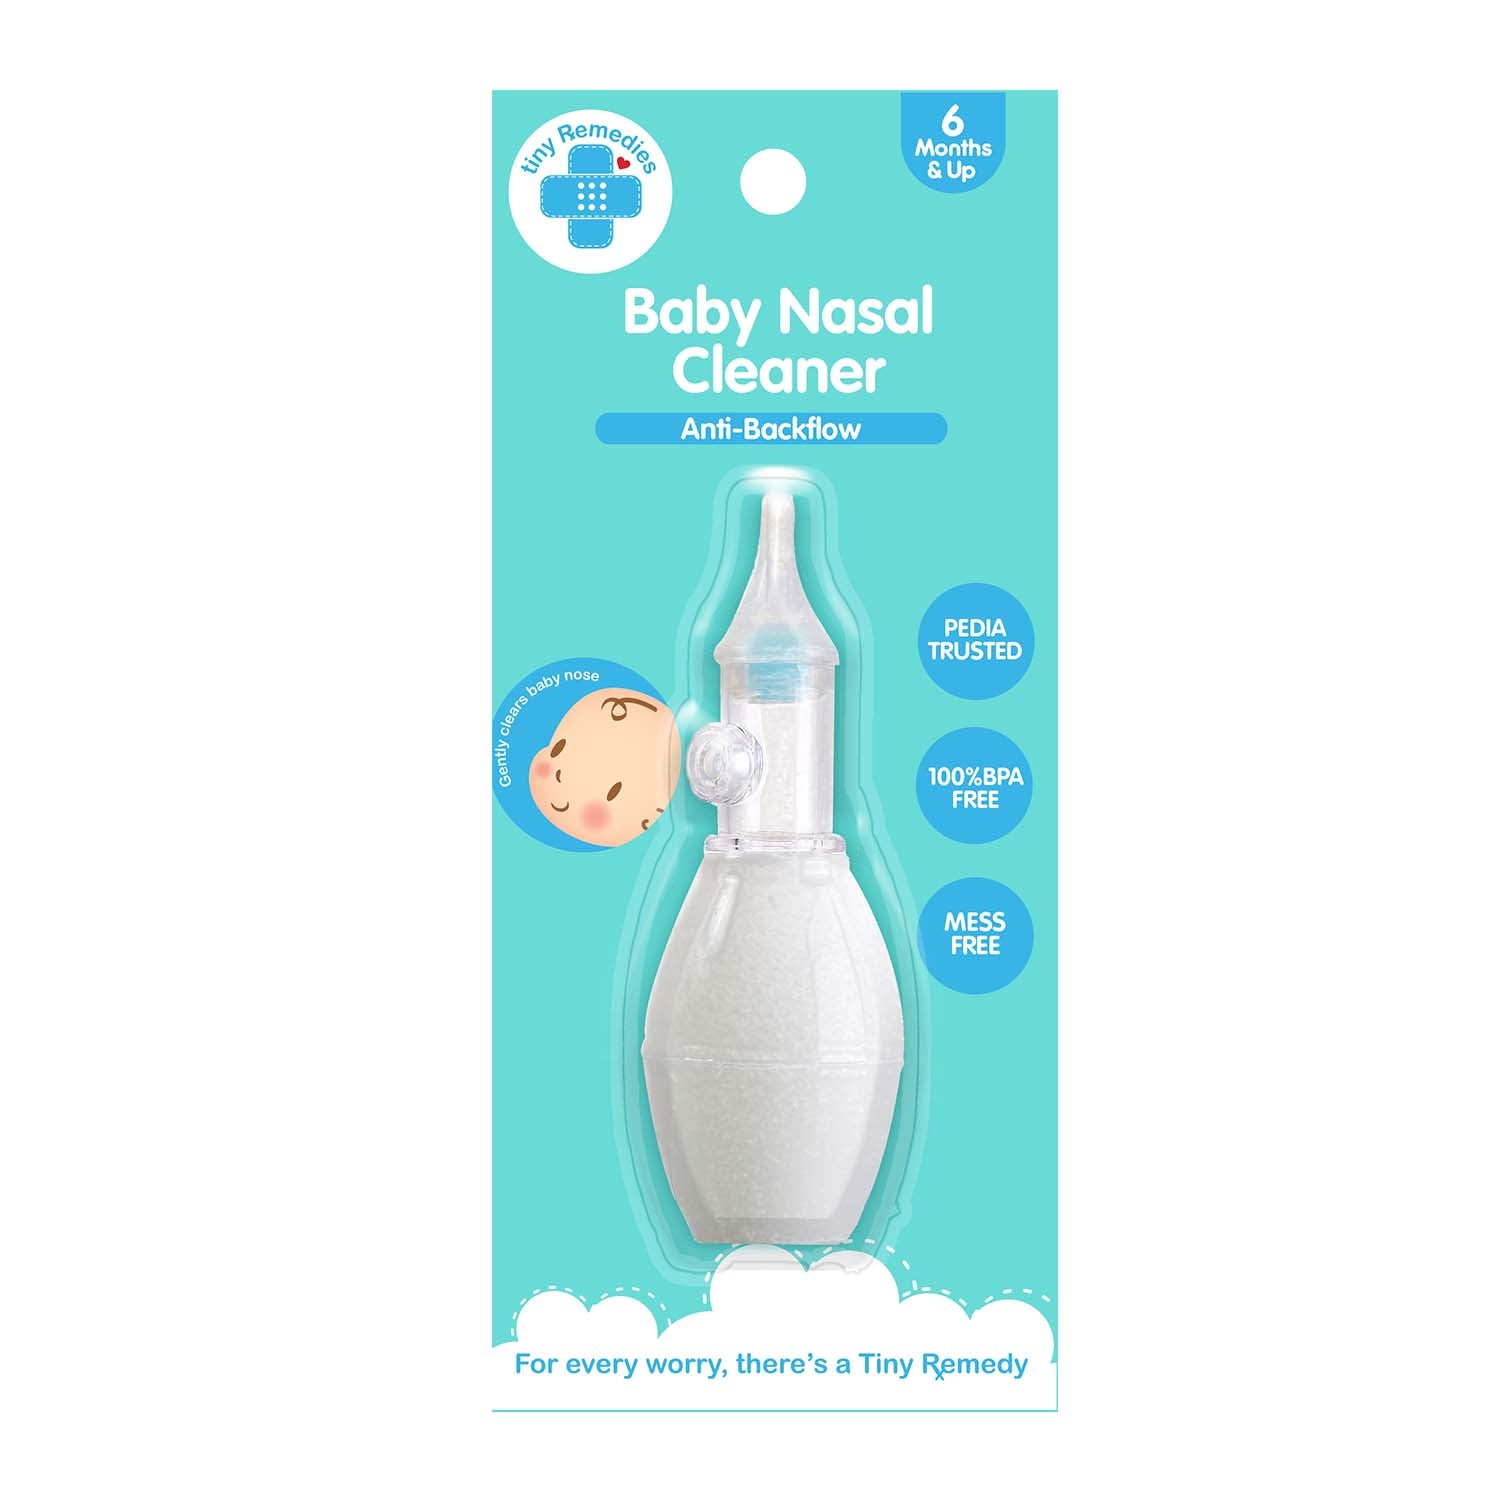 BUDS & BLOOMS Breastfeeding Cleansing Mist Spray 100ml – Tiny Buds Baby  Naturals